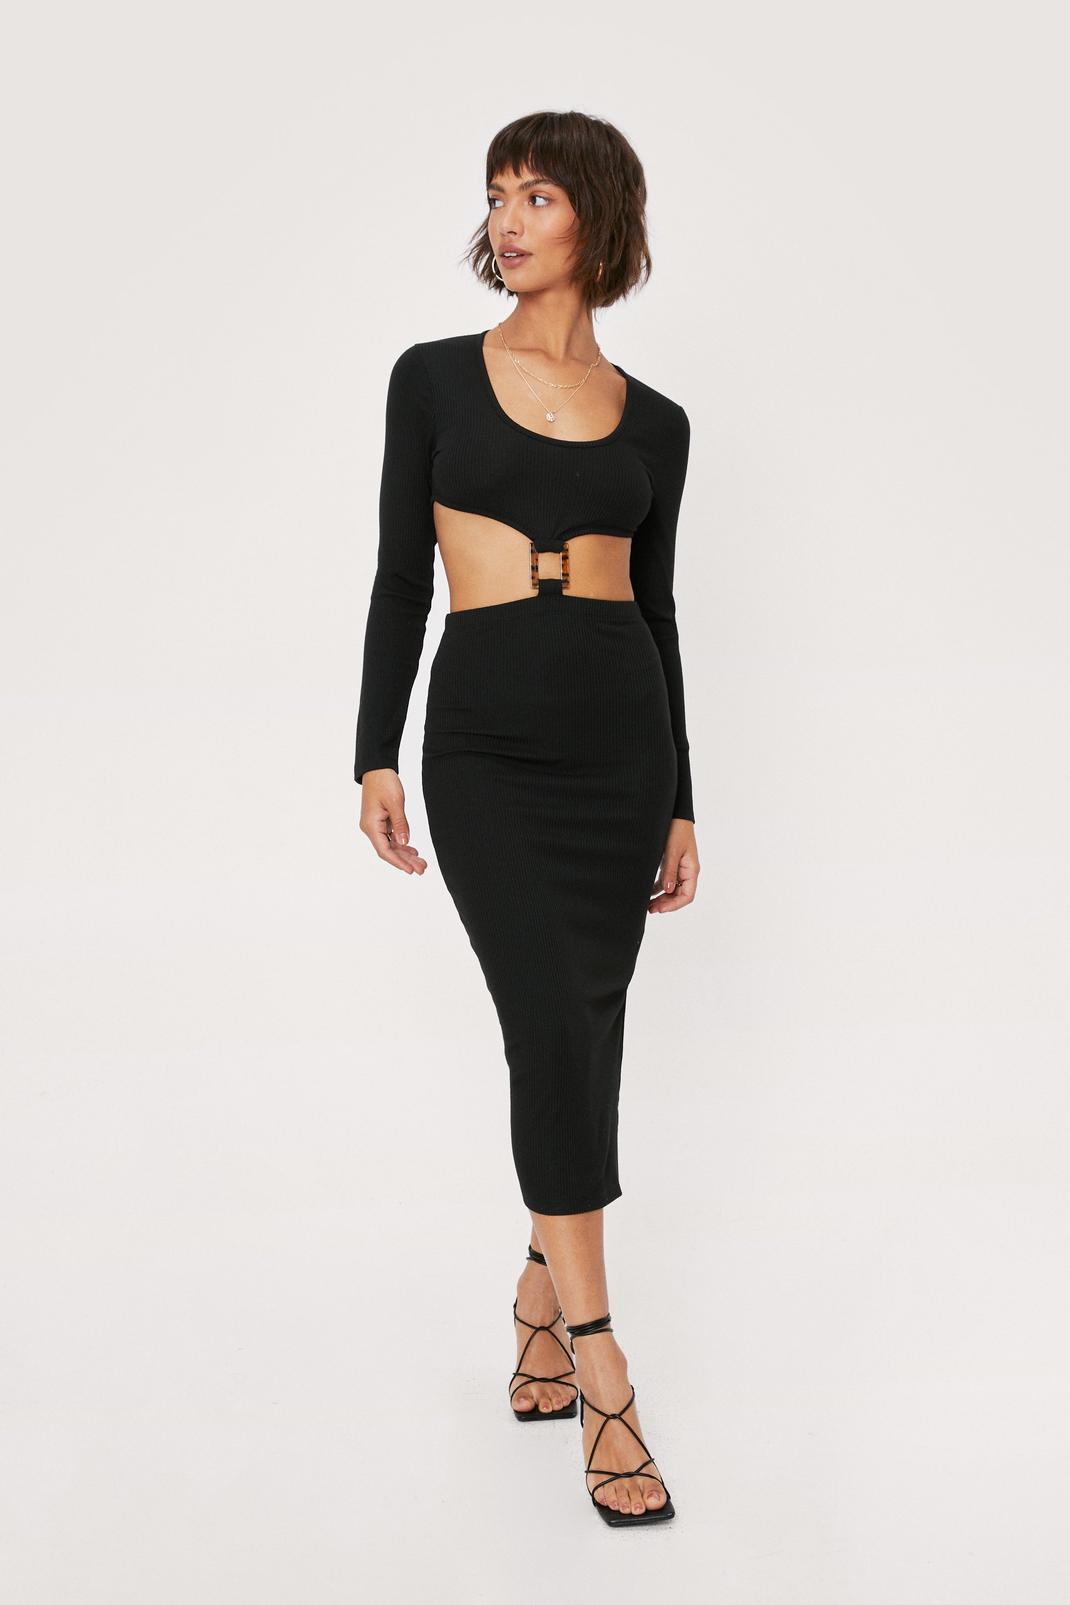 Black Bodycon Cut Out Midi Dress With Buckle Trim image number 1